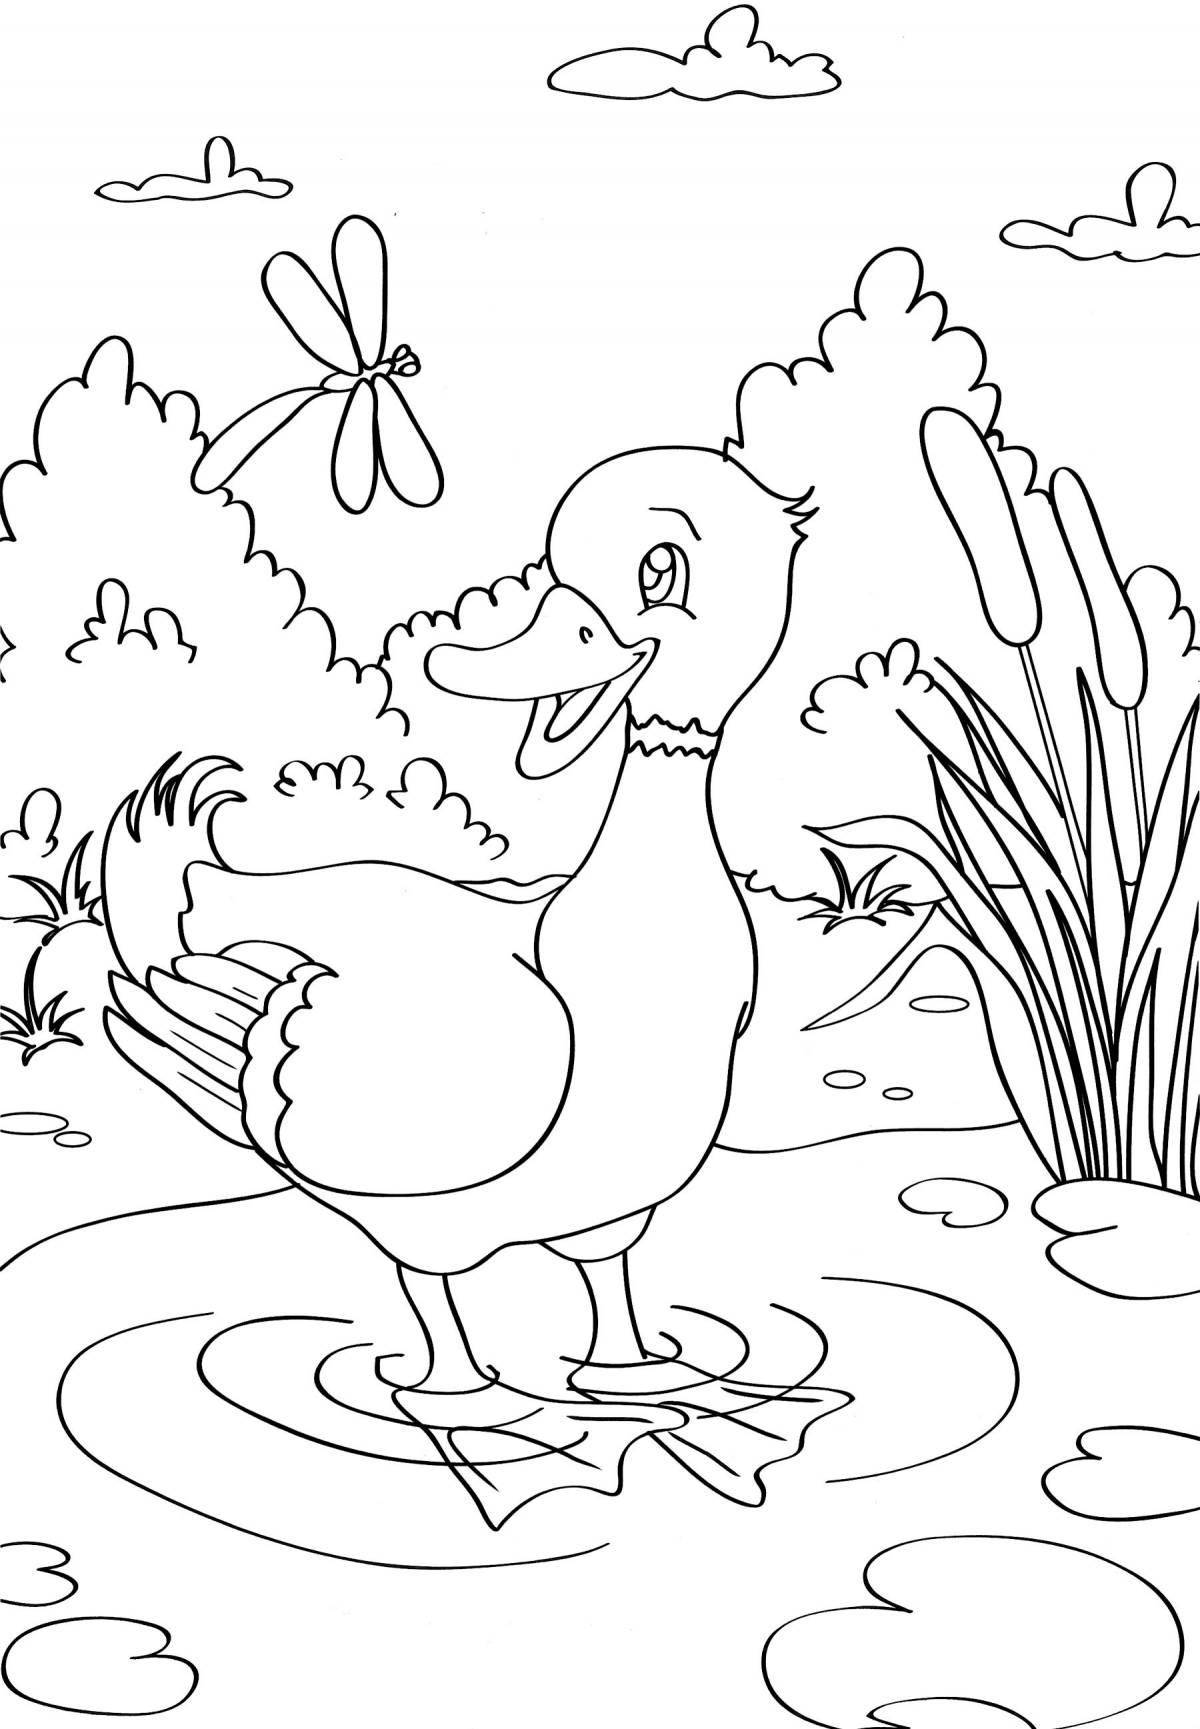 Coloring brave duck - glamorous